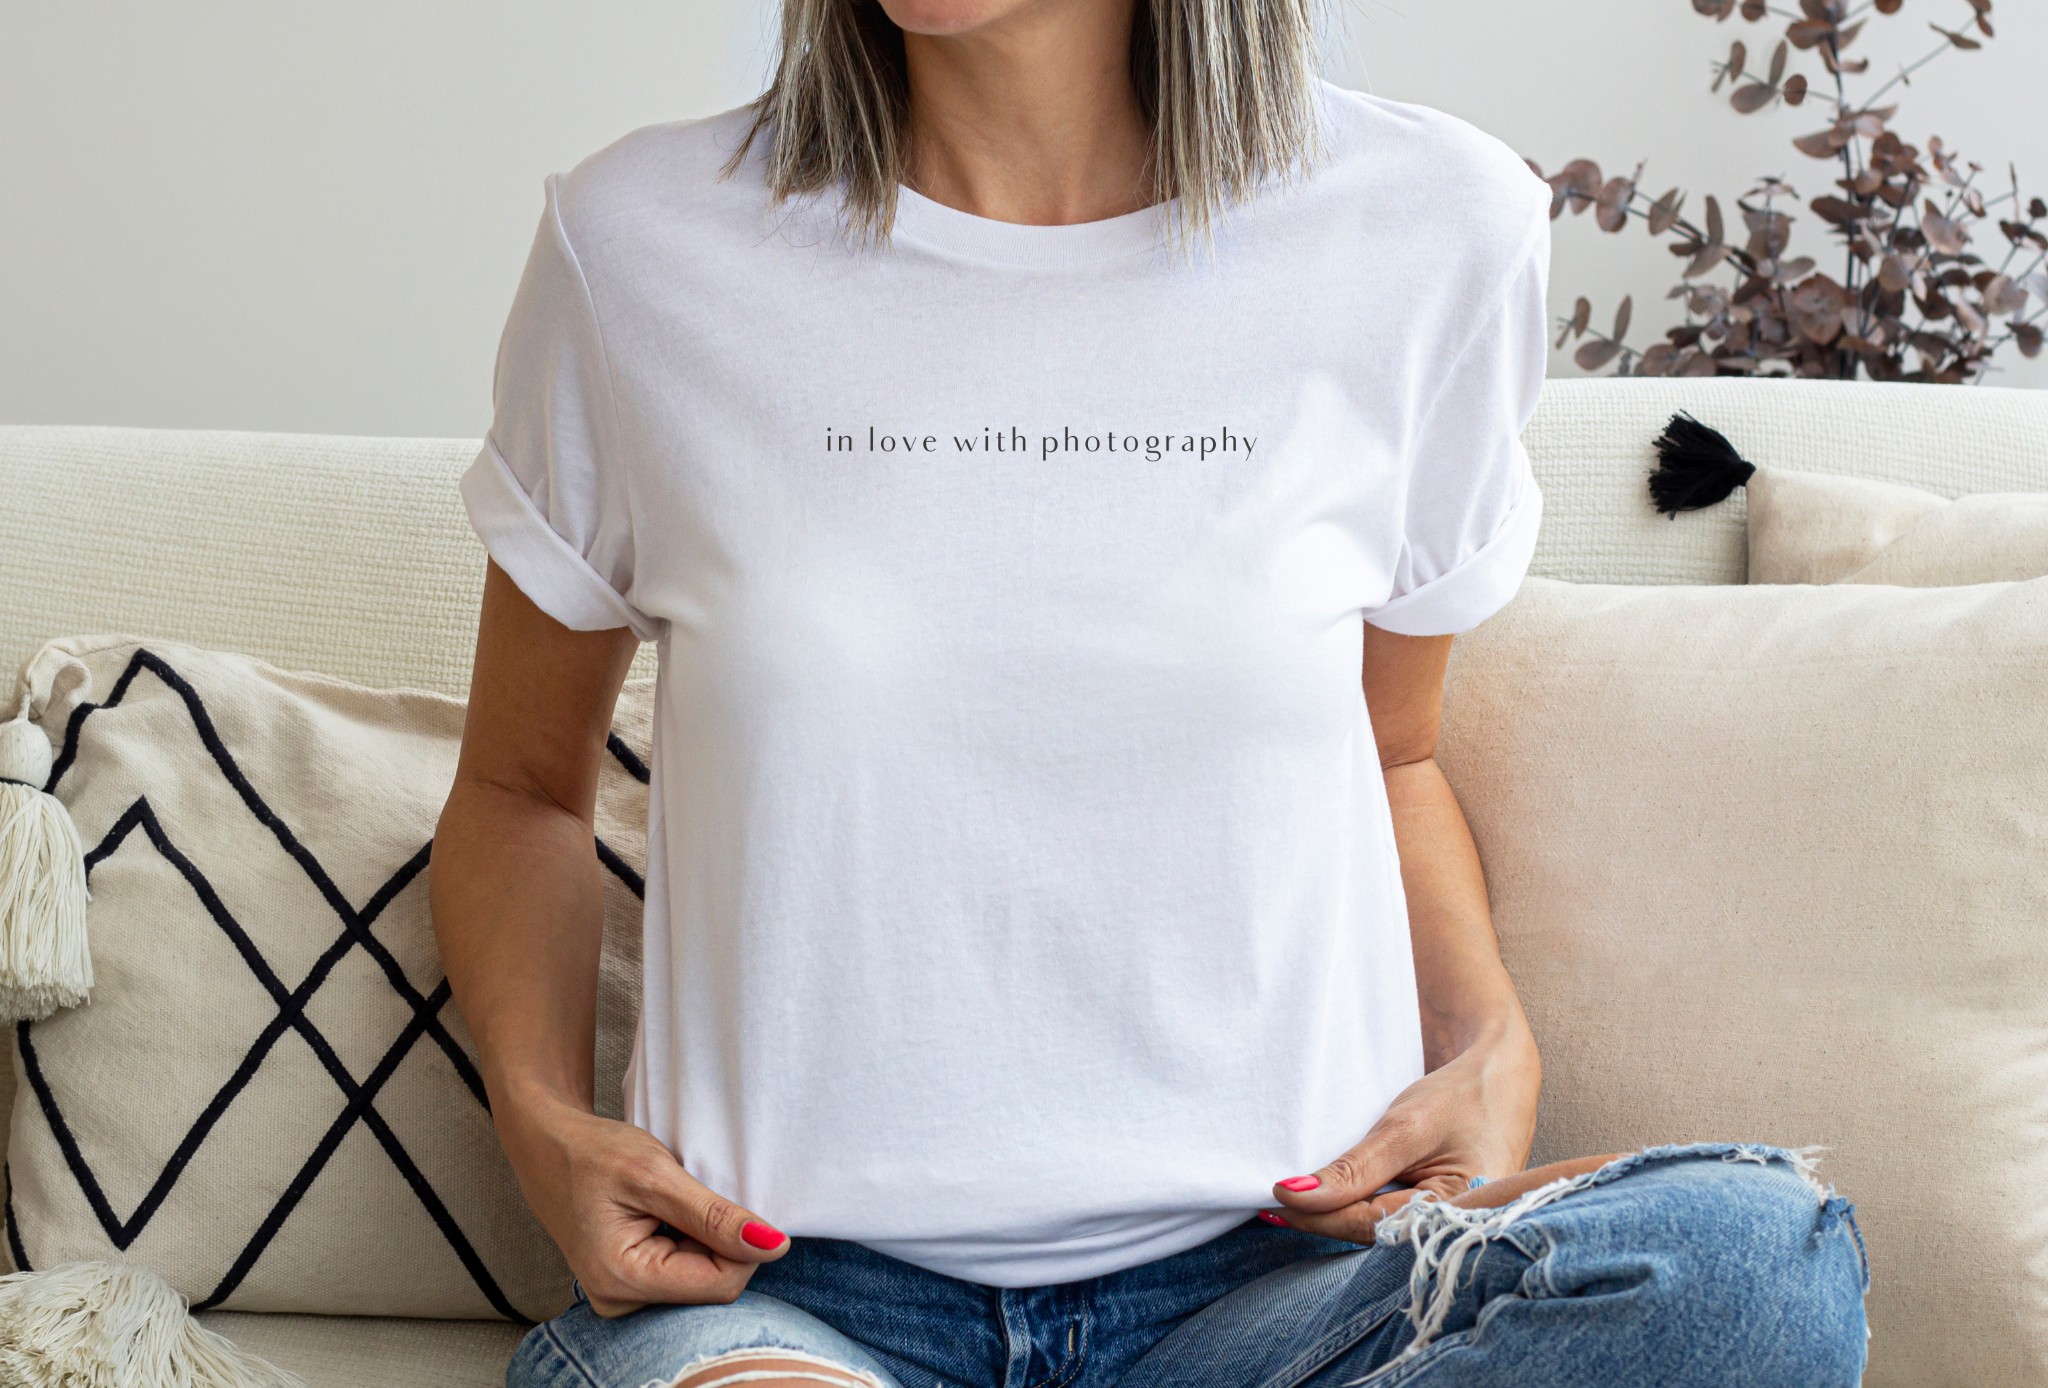 In love with photography t-shirt